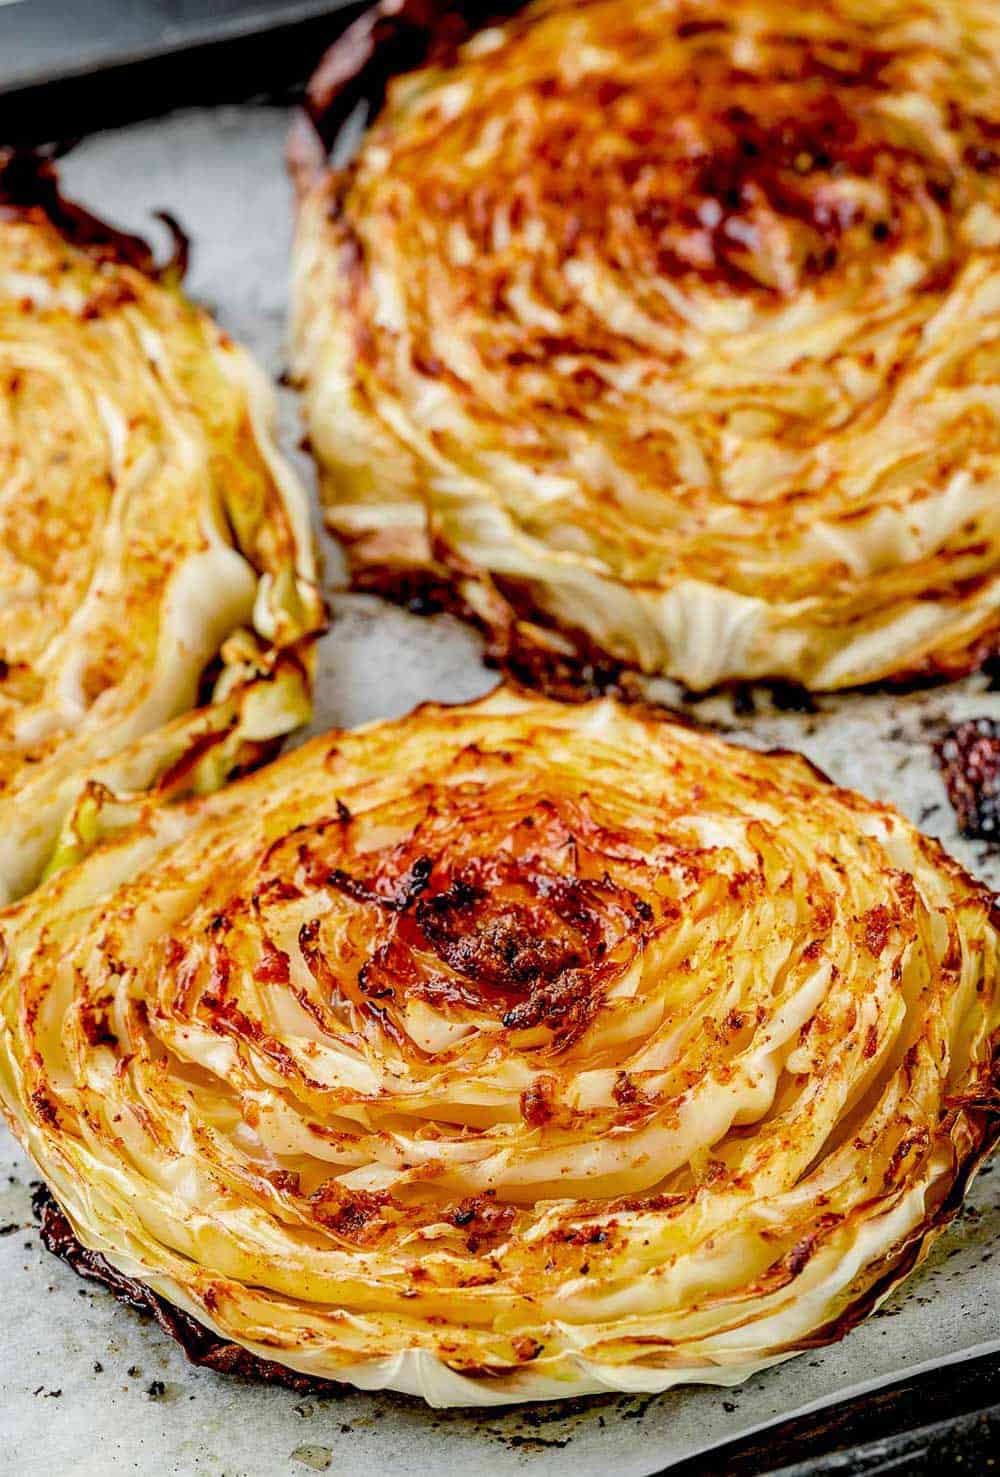 Golden-brown roasted cabbage steaks on a baking sheet, cooked to perfection with a crispy outer layer and tender inside.